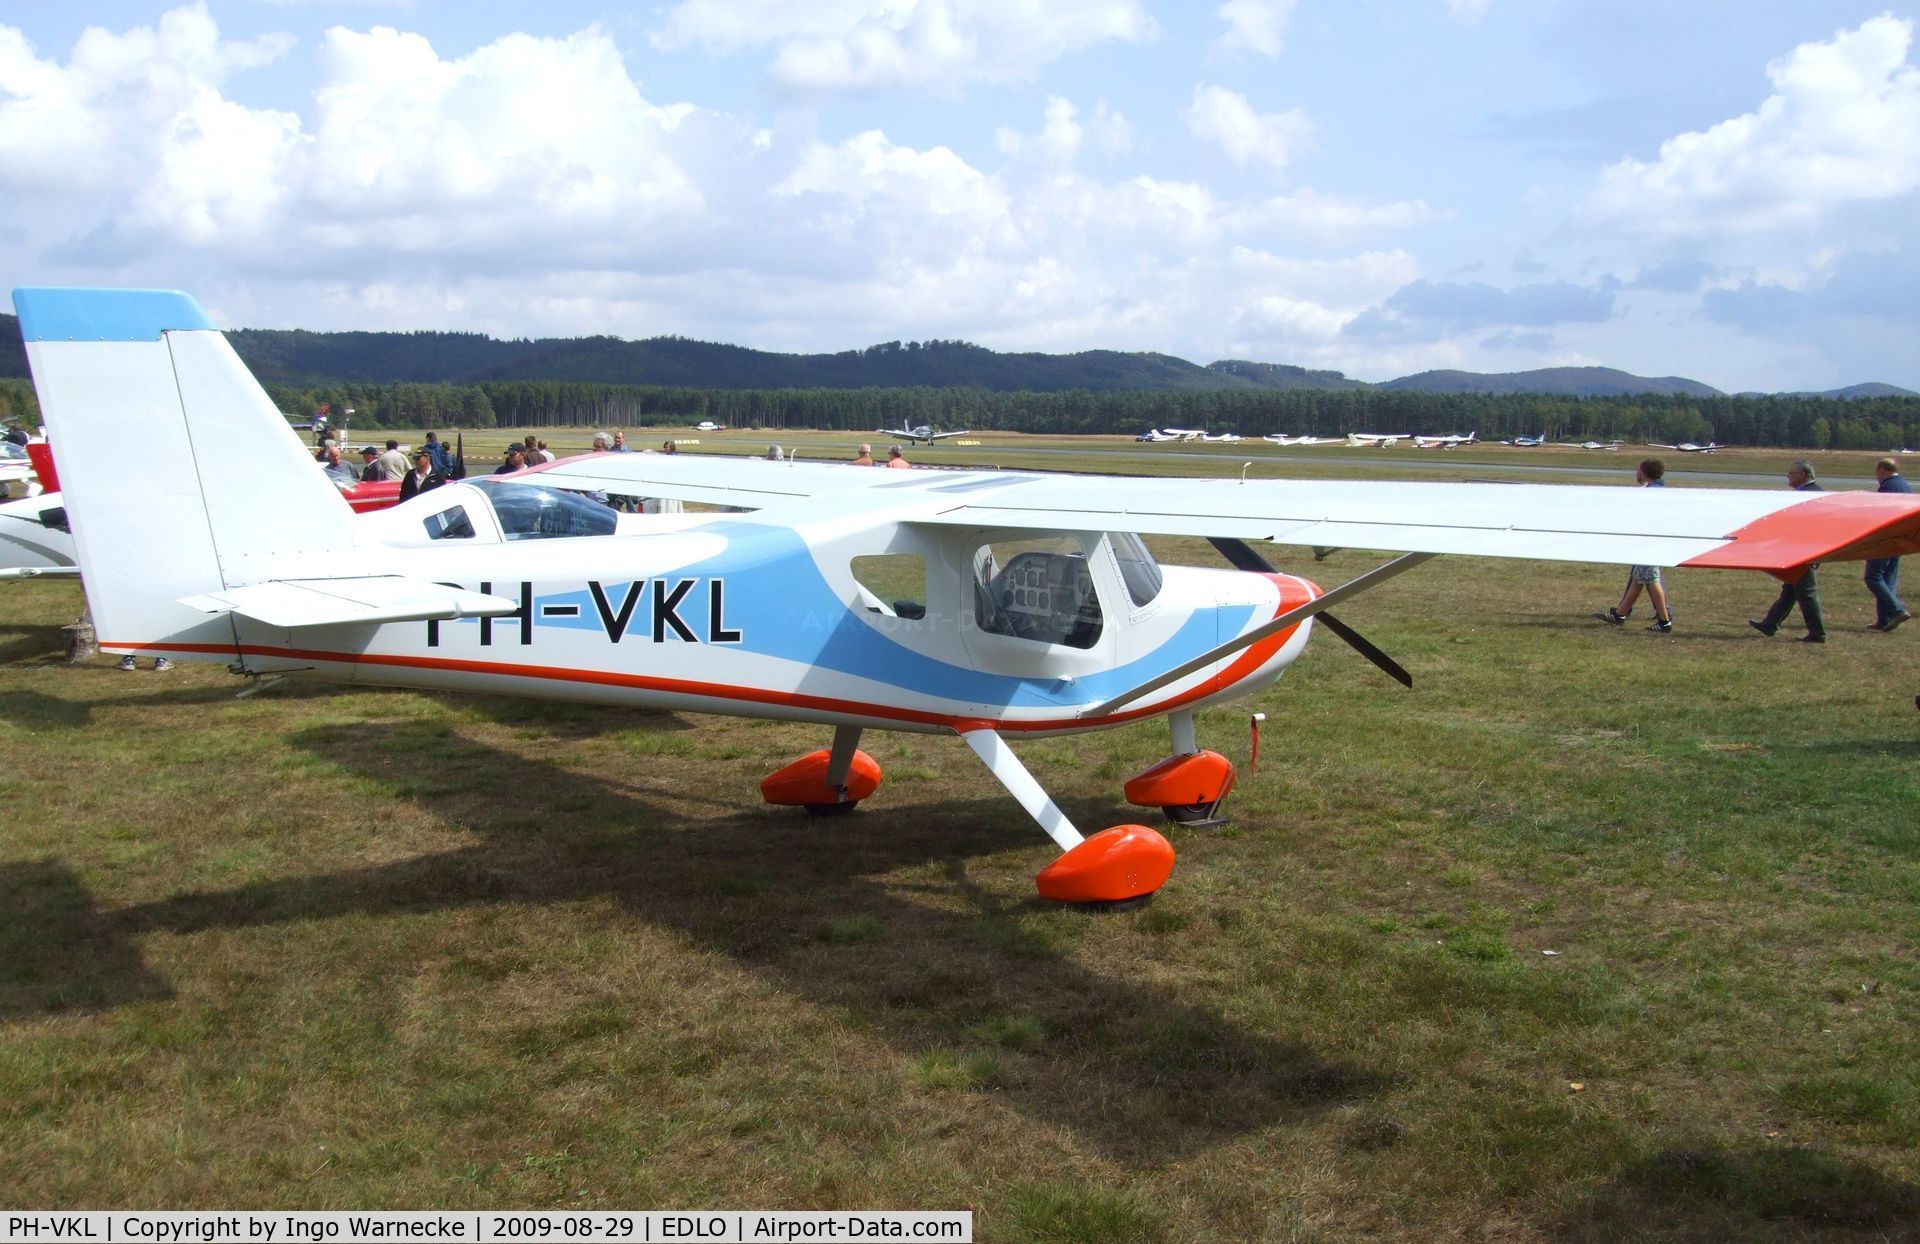 PH-VKL, Ultravia Pelican PL C/N 685, Ultravia Pelican PL at the 2009 OUV-Meeting at Oerlinghausen airfield